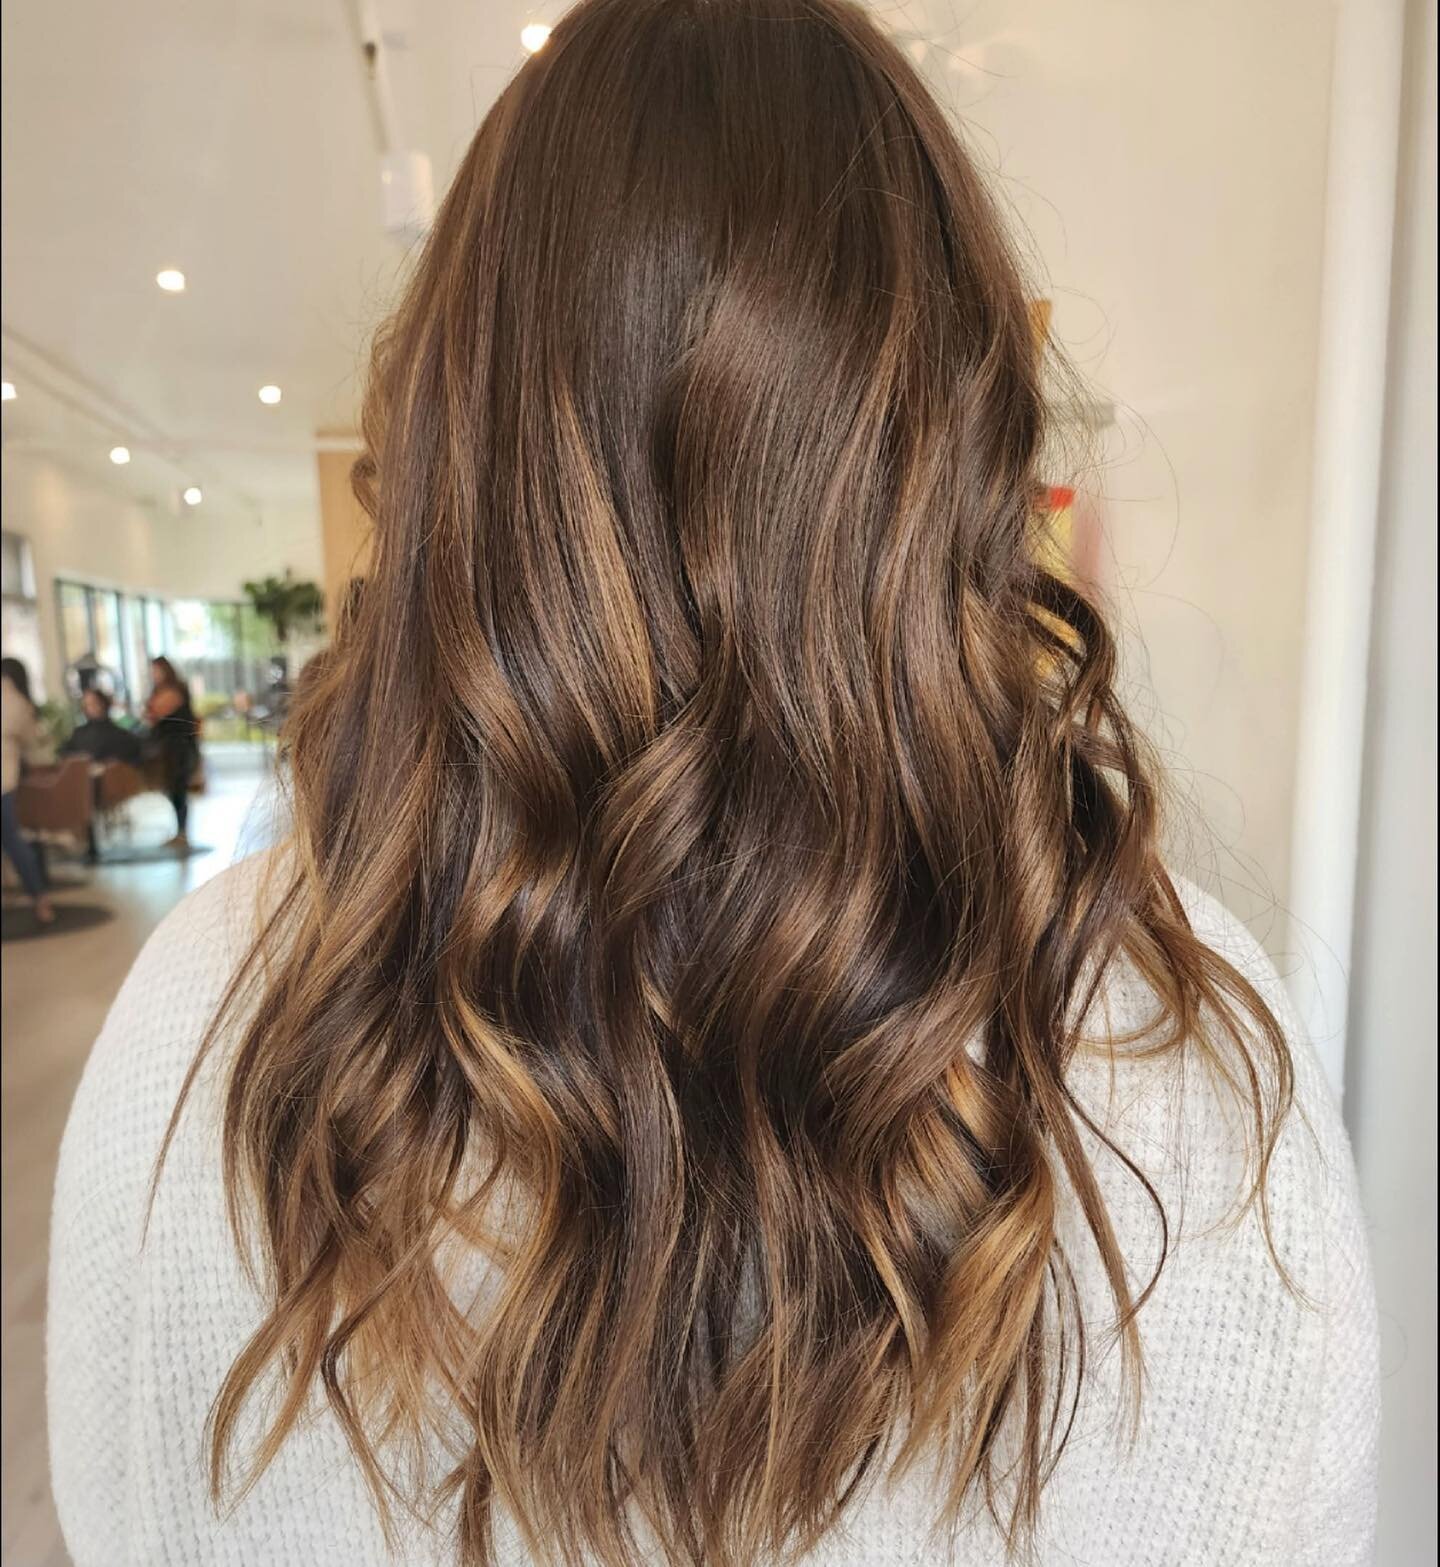 @maggierosehair killing it again with the perfect kiss of caramel on some gorgeous hair! ✨

#staygold #kalamazoosalon #kalamazoohairstylist #kalamazoohairsalon #portagehairstylist #portsgesalon #westmichiganhairstylist #discoverkzoo #allyouneedisgood